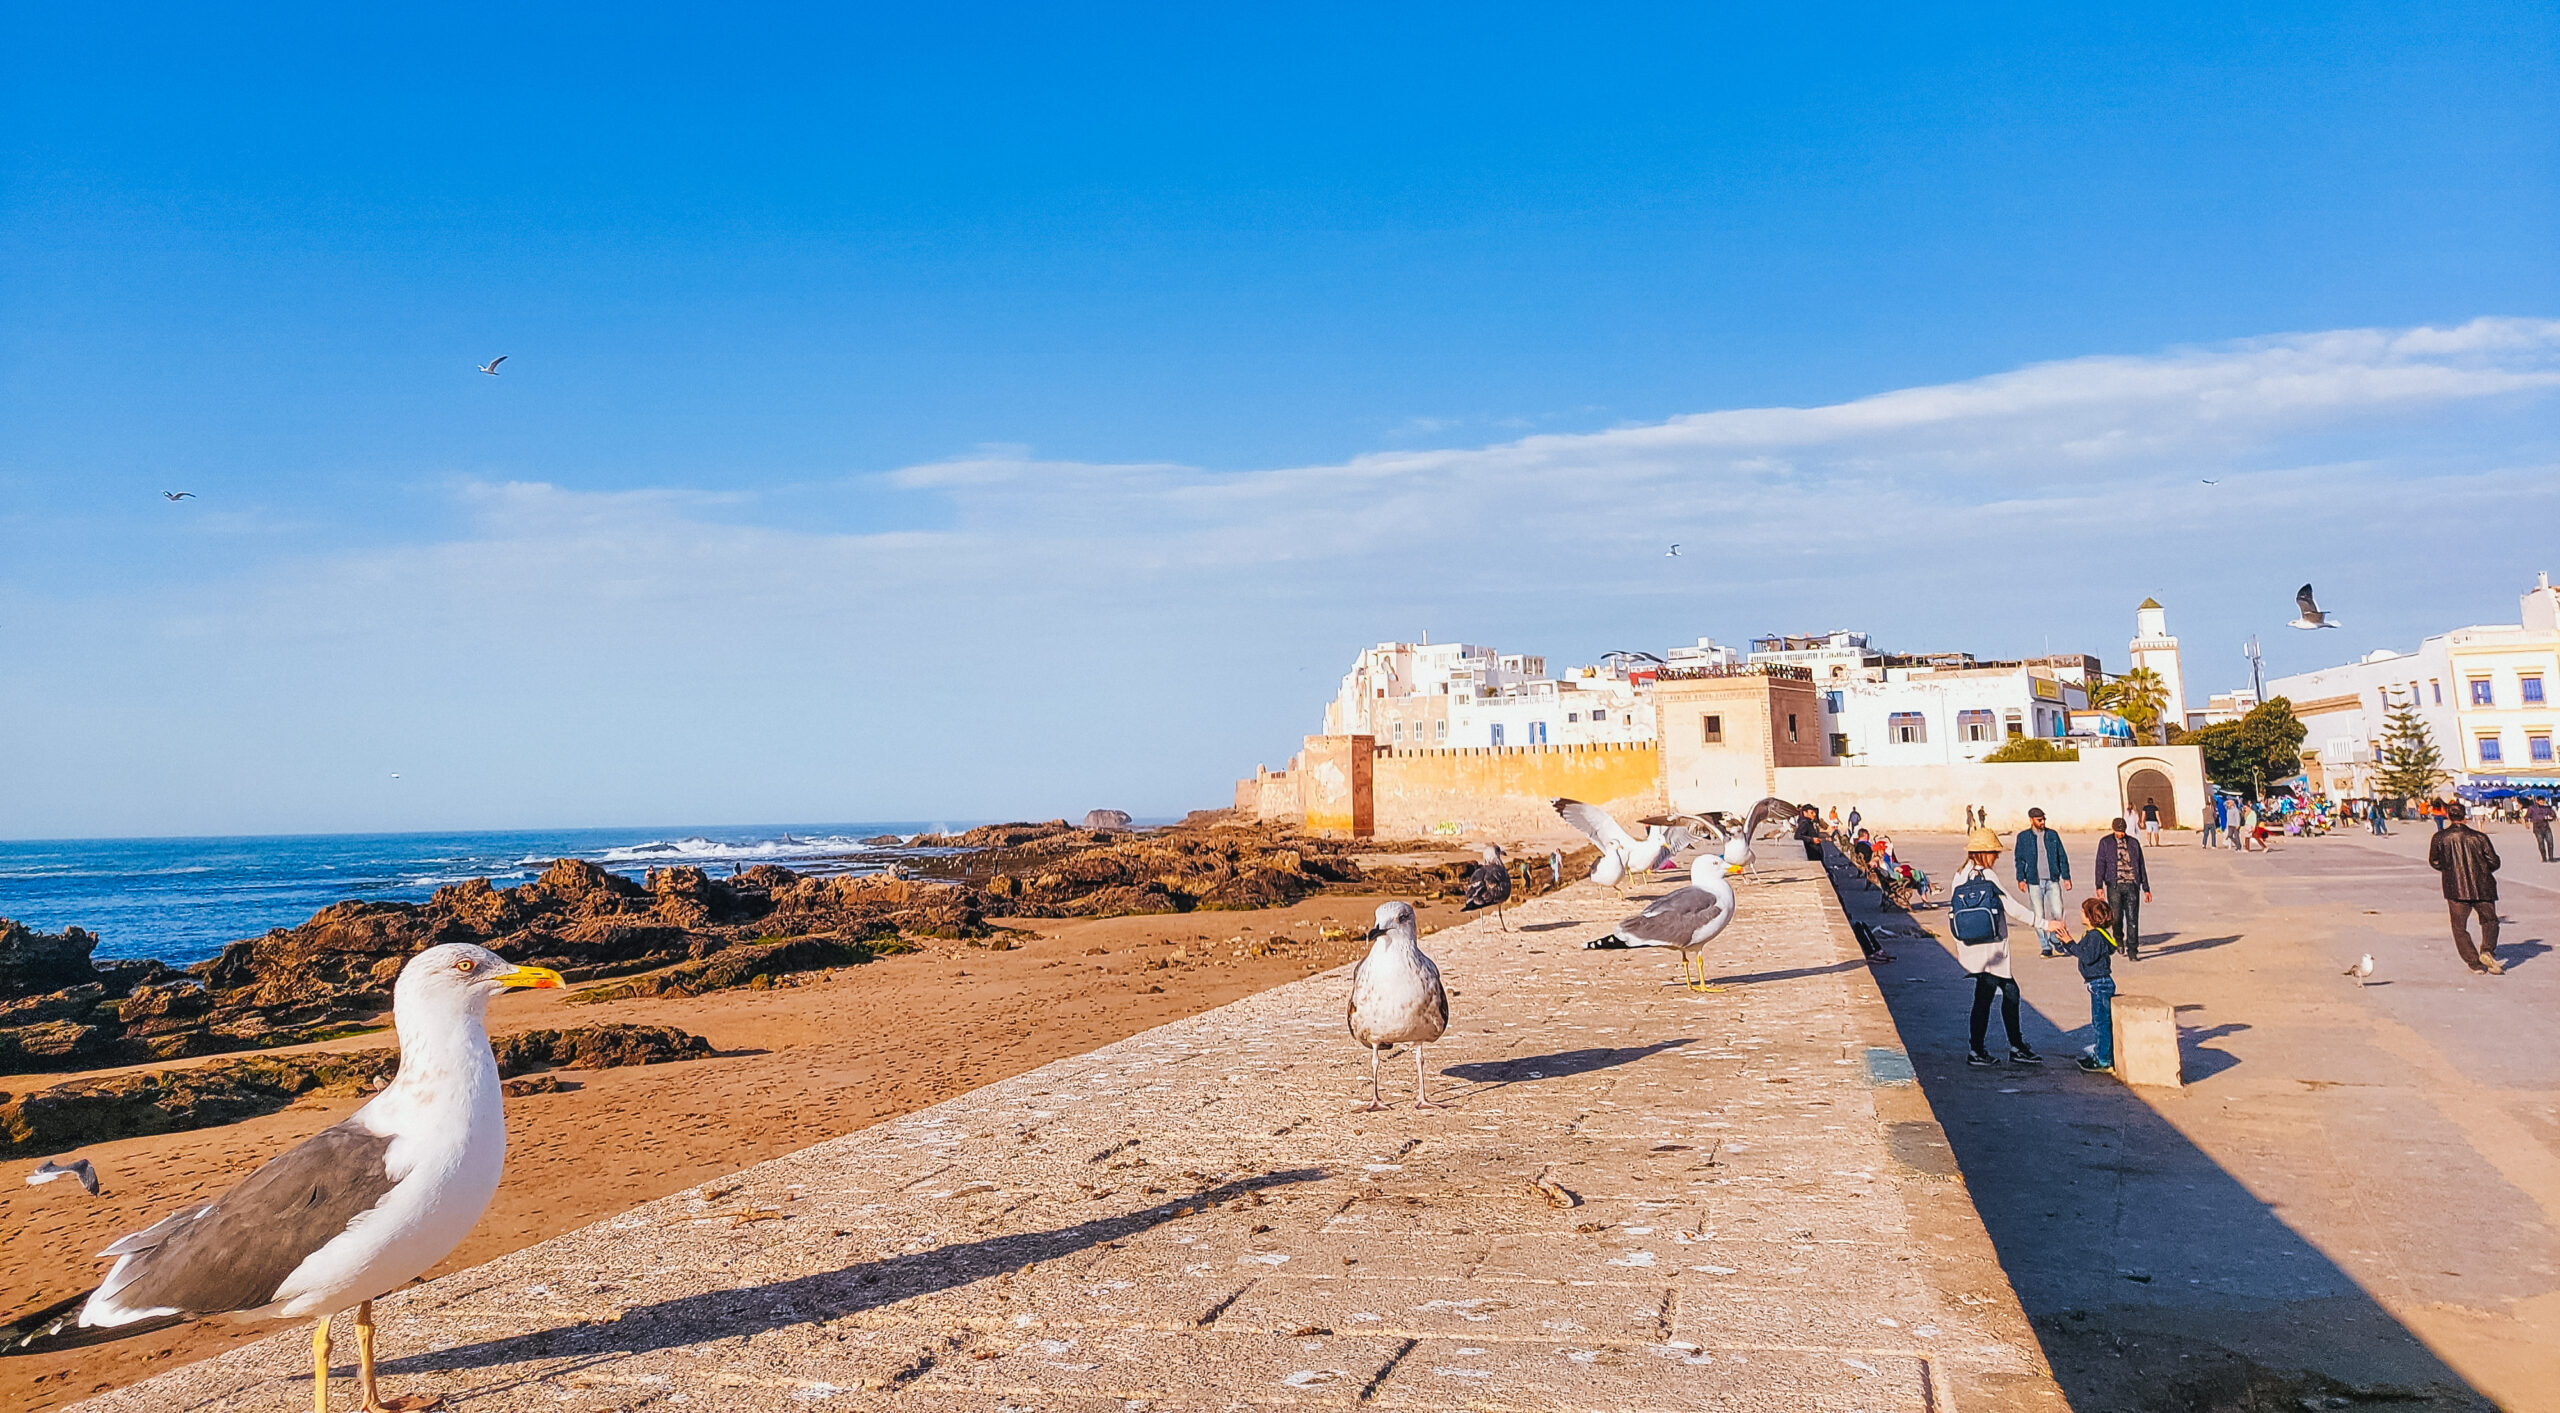 How to Get to Essaouira Beach in Marrakech scaled